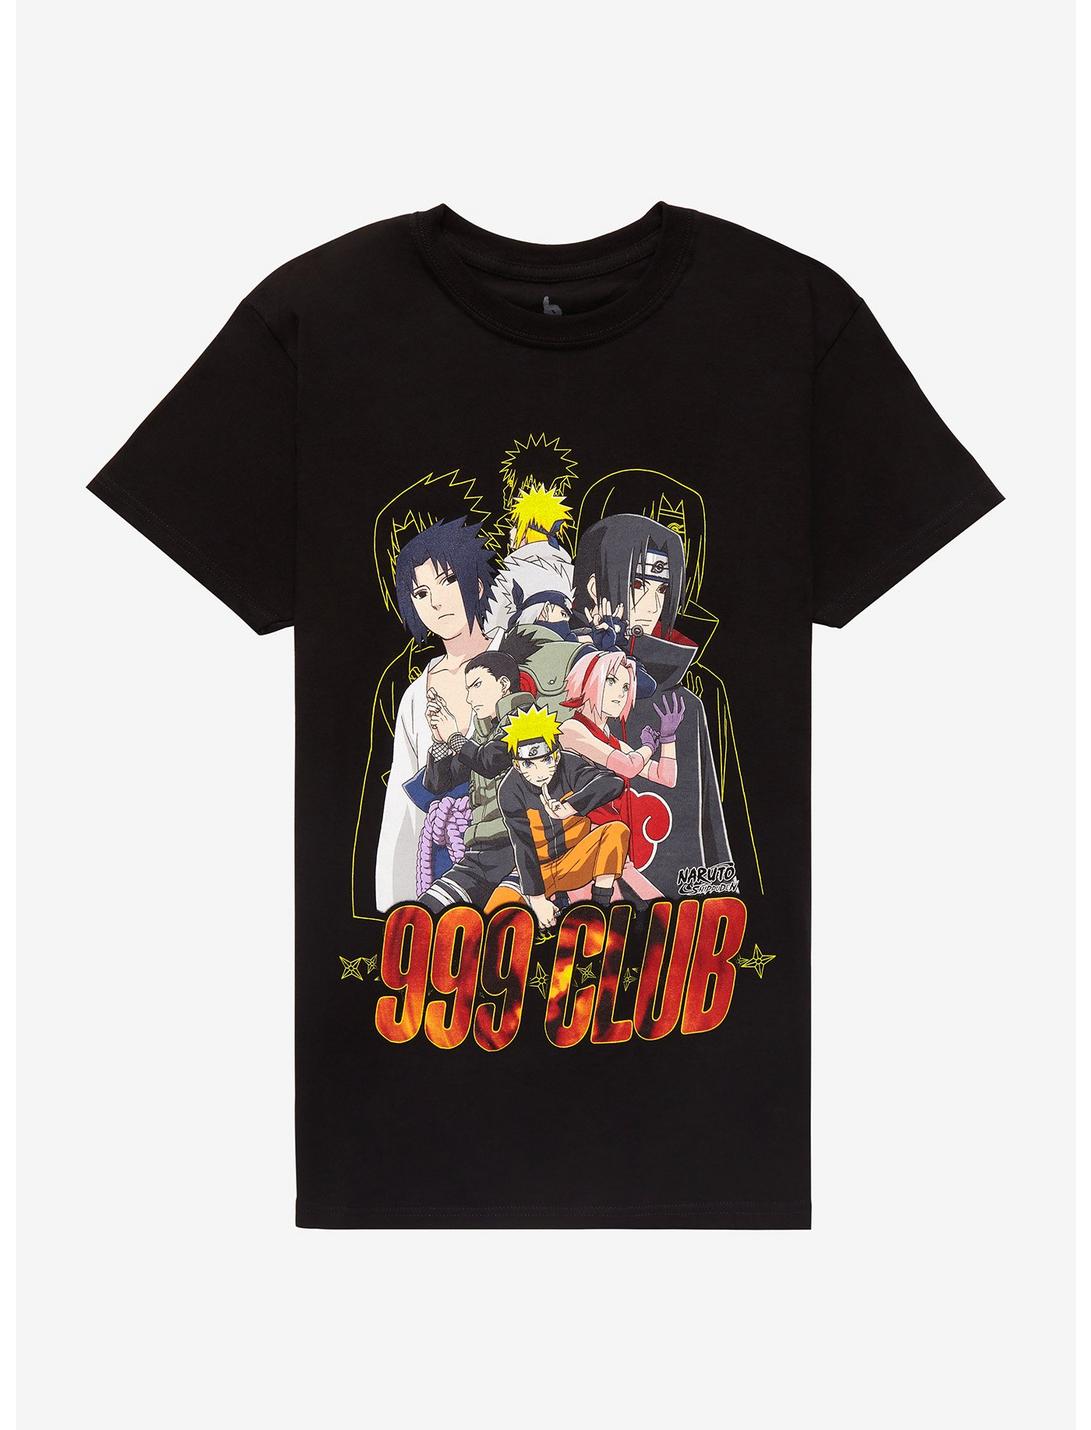 999 By Juice WRLD X Naruto Group T-Shirt Hot Topic Exclusive, BLACK, hi-res